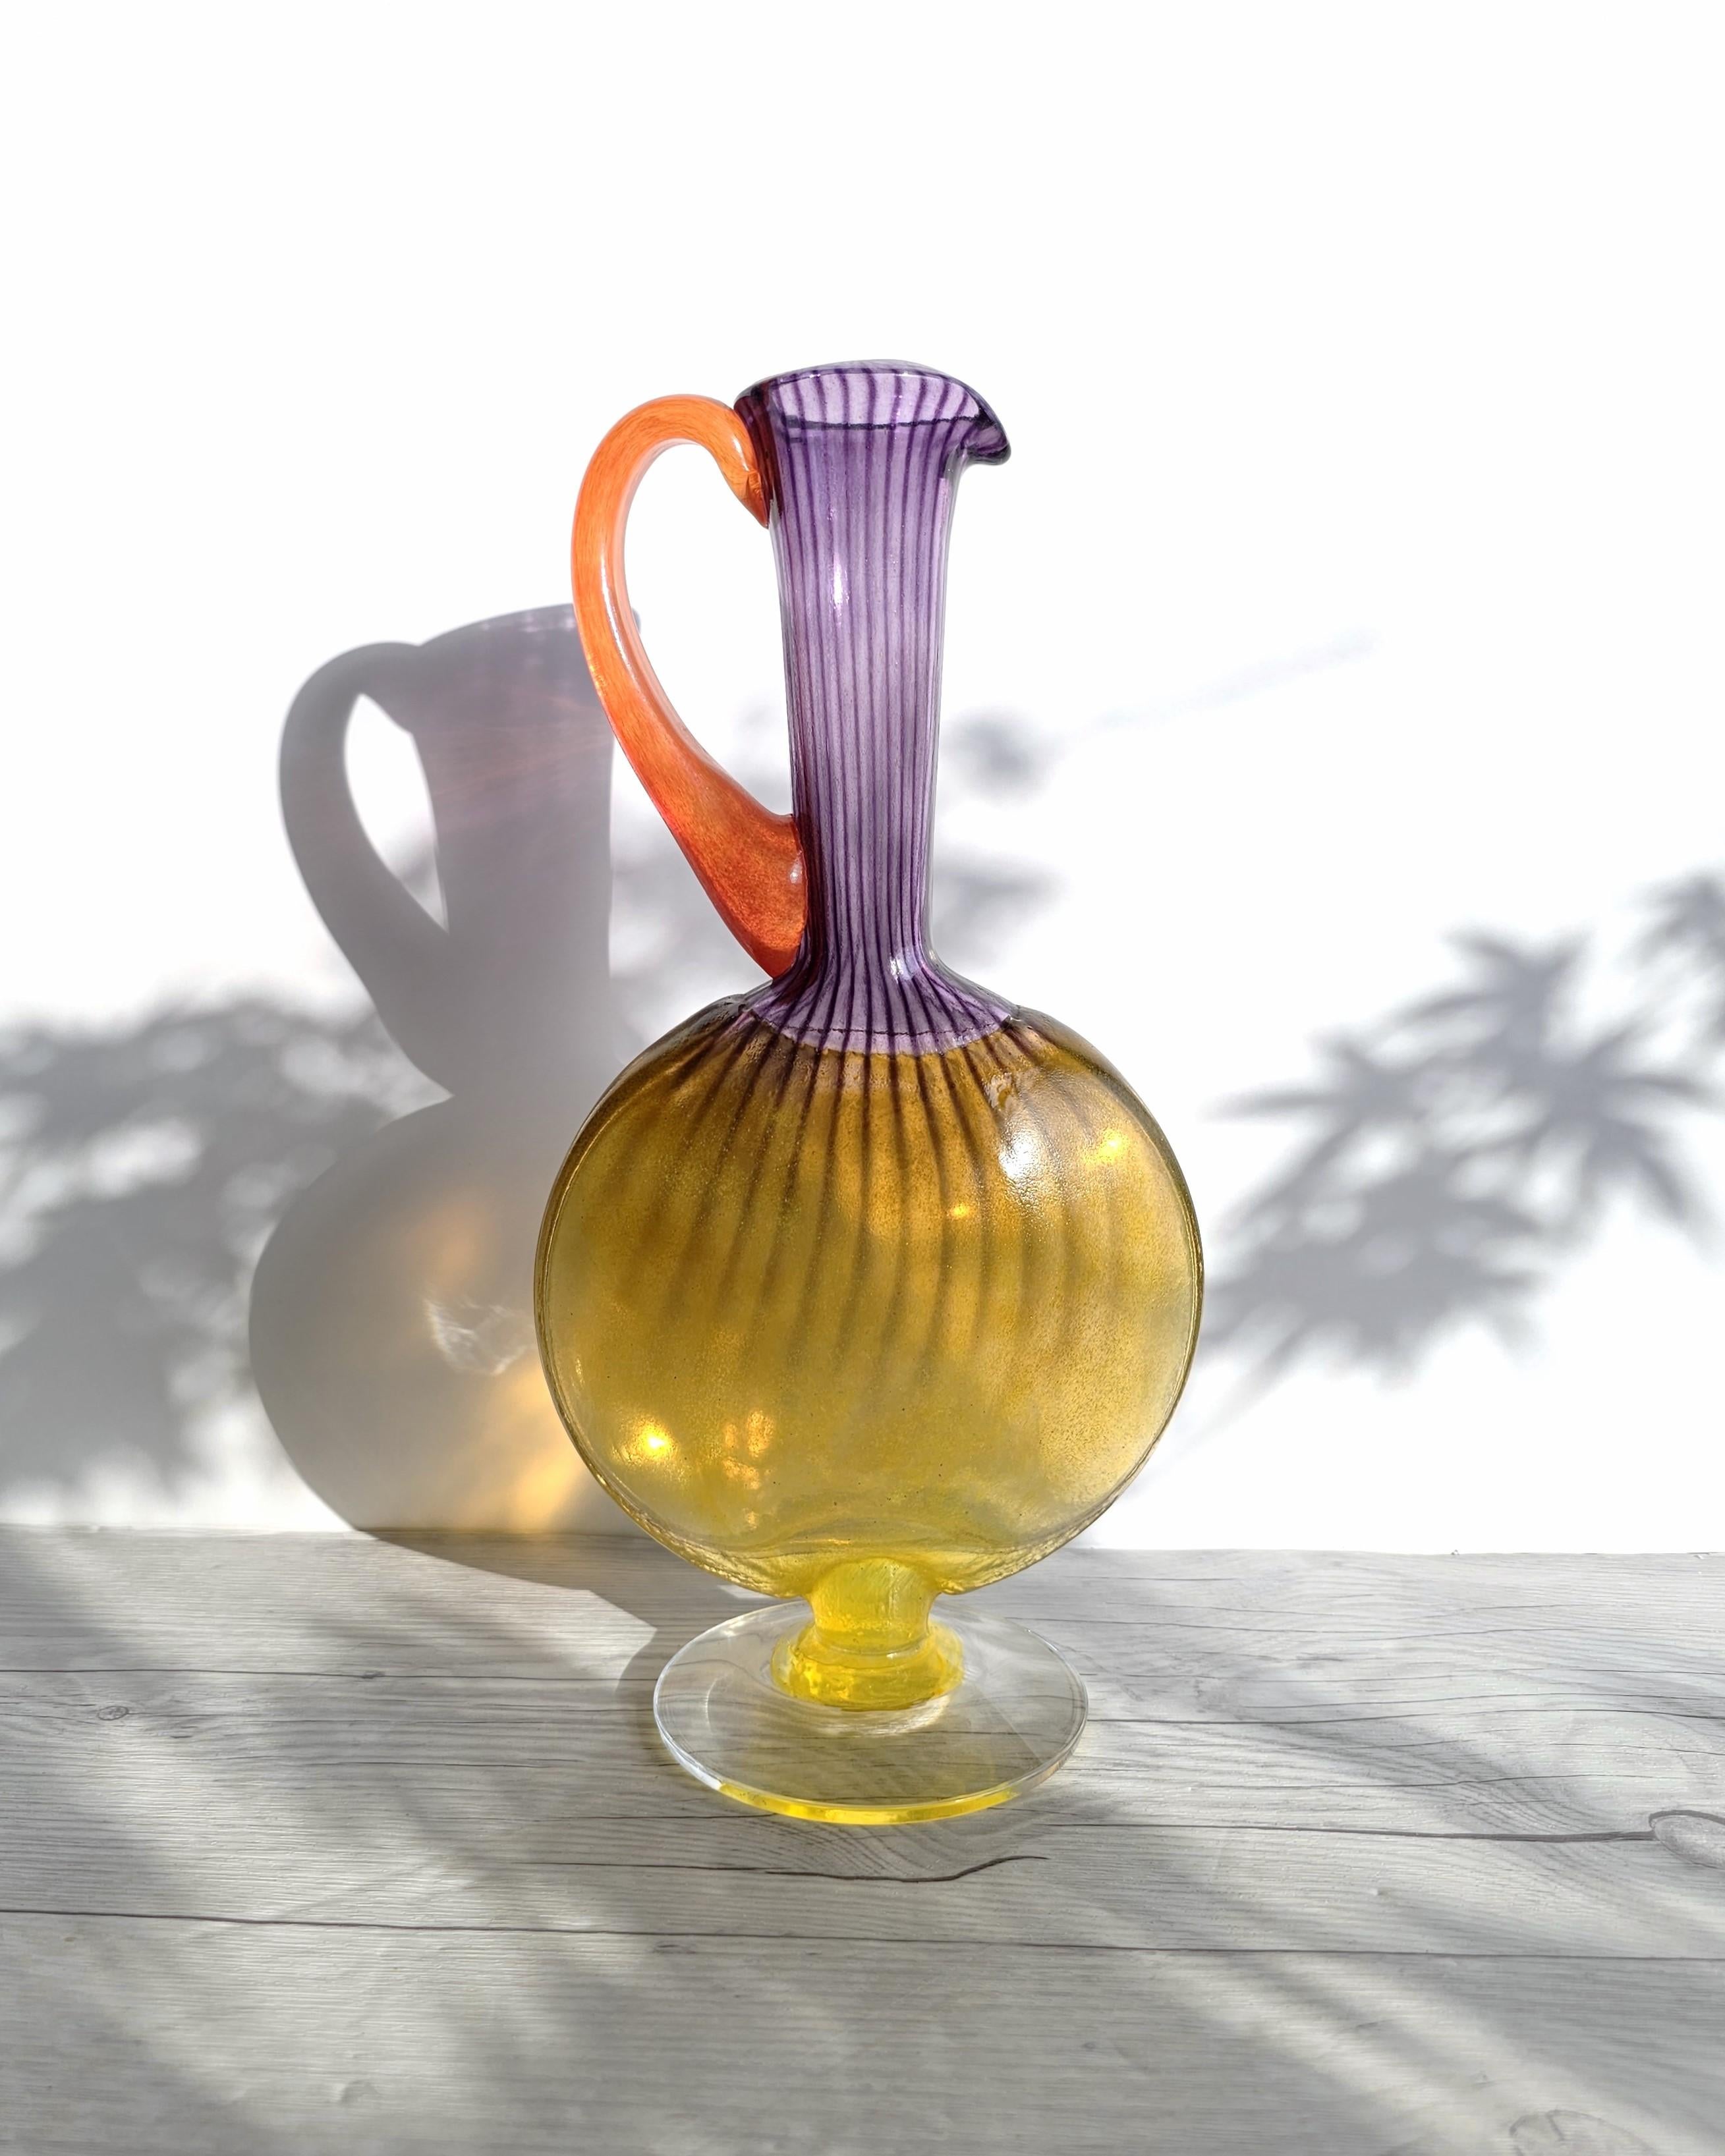 This delicious handblown work of Postmodern art glass is by leading Swedish glass artist Kjell Engman (b. 1946 -) for Kosta Boda. From his popular series named Bon Bon that was designed by Engman in 1989, the series remained in production until